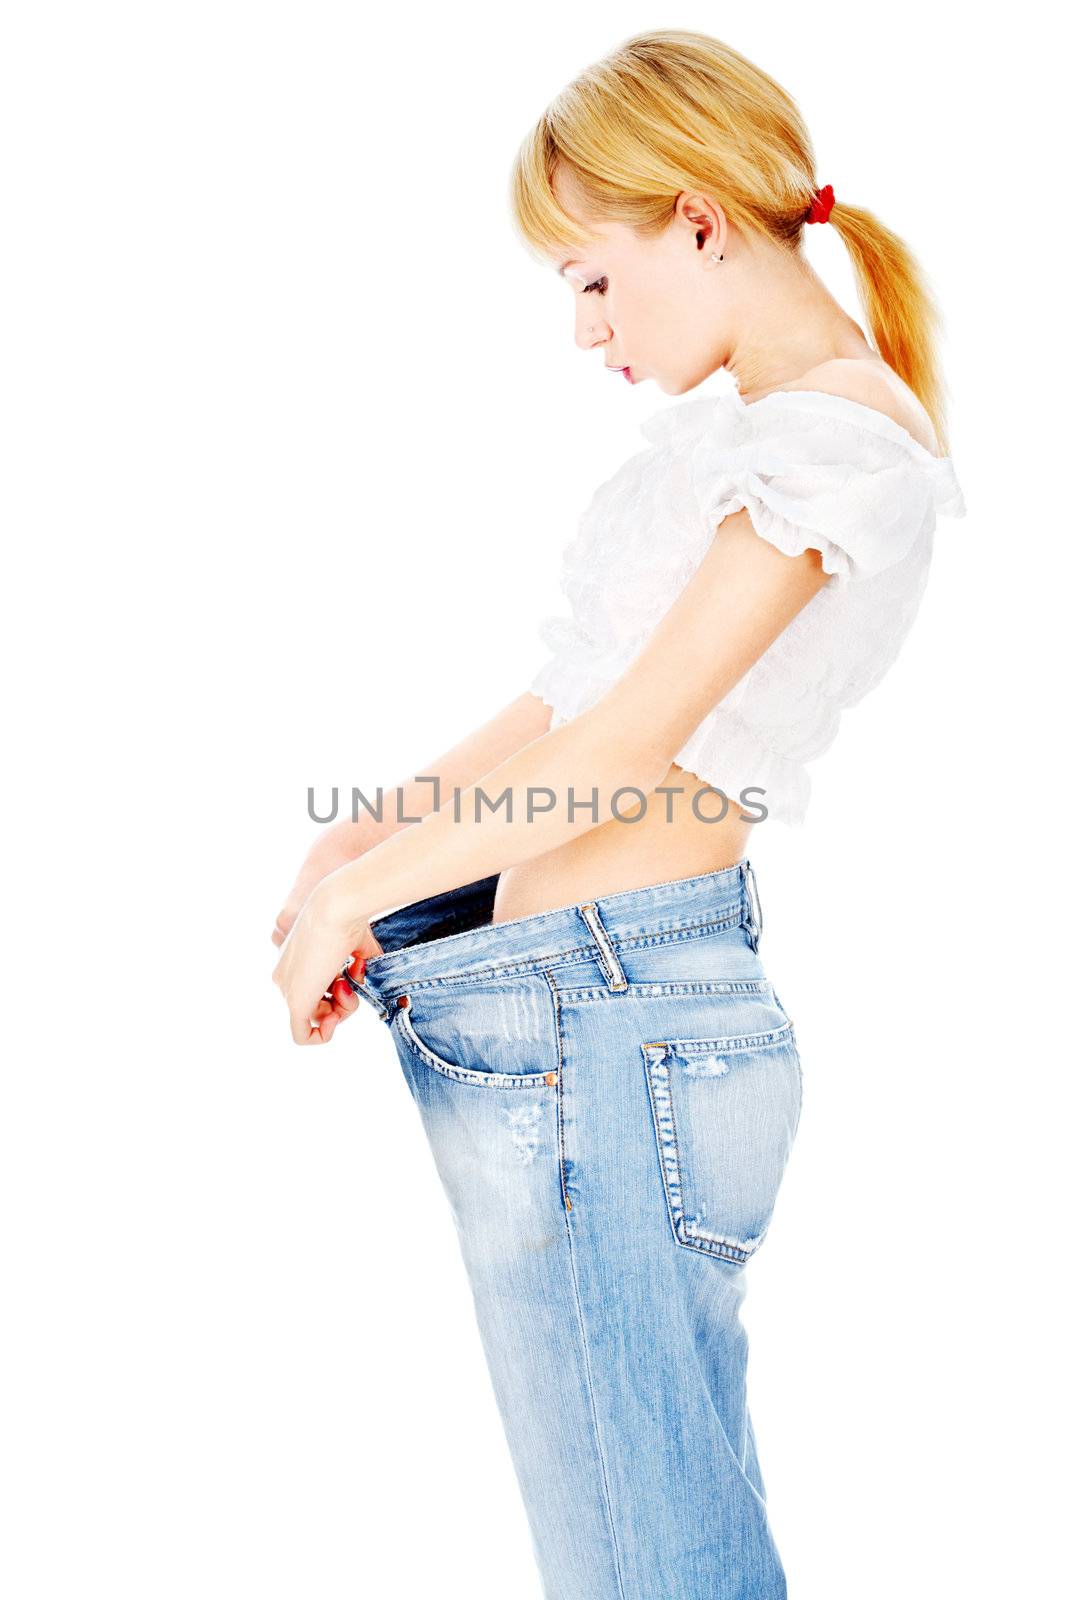 Handsame lady losted her kilograms, isolated on white background